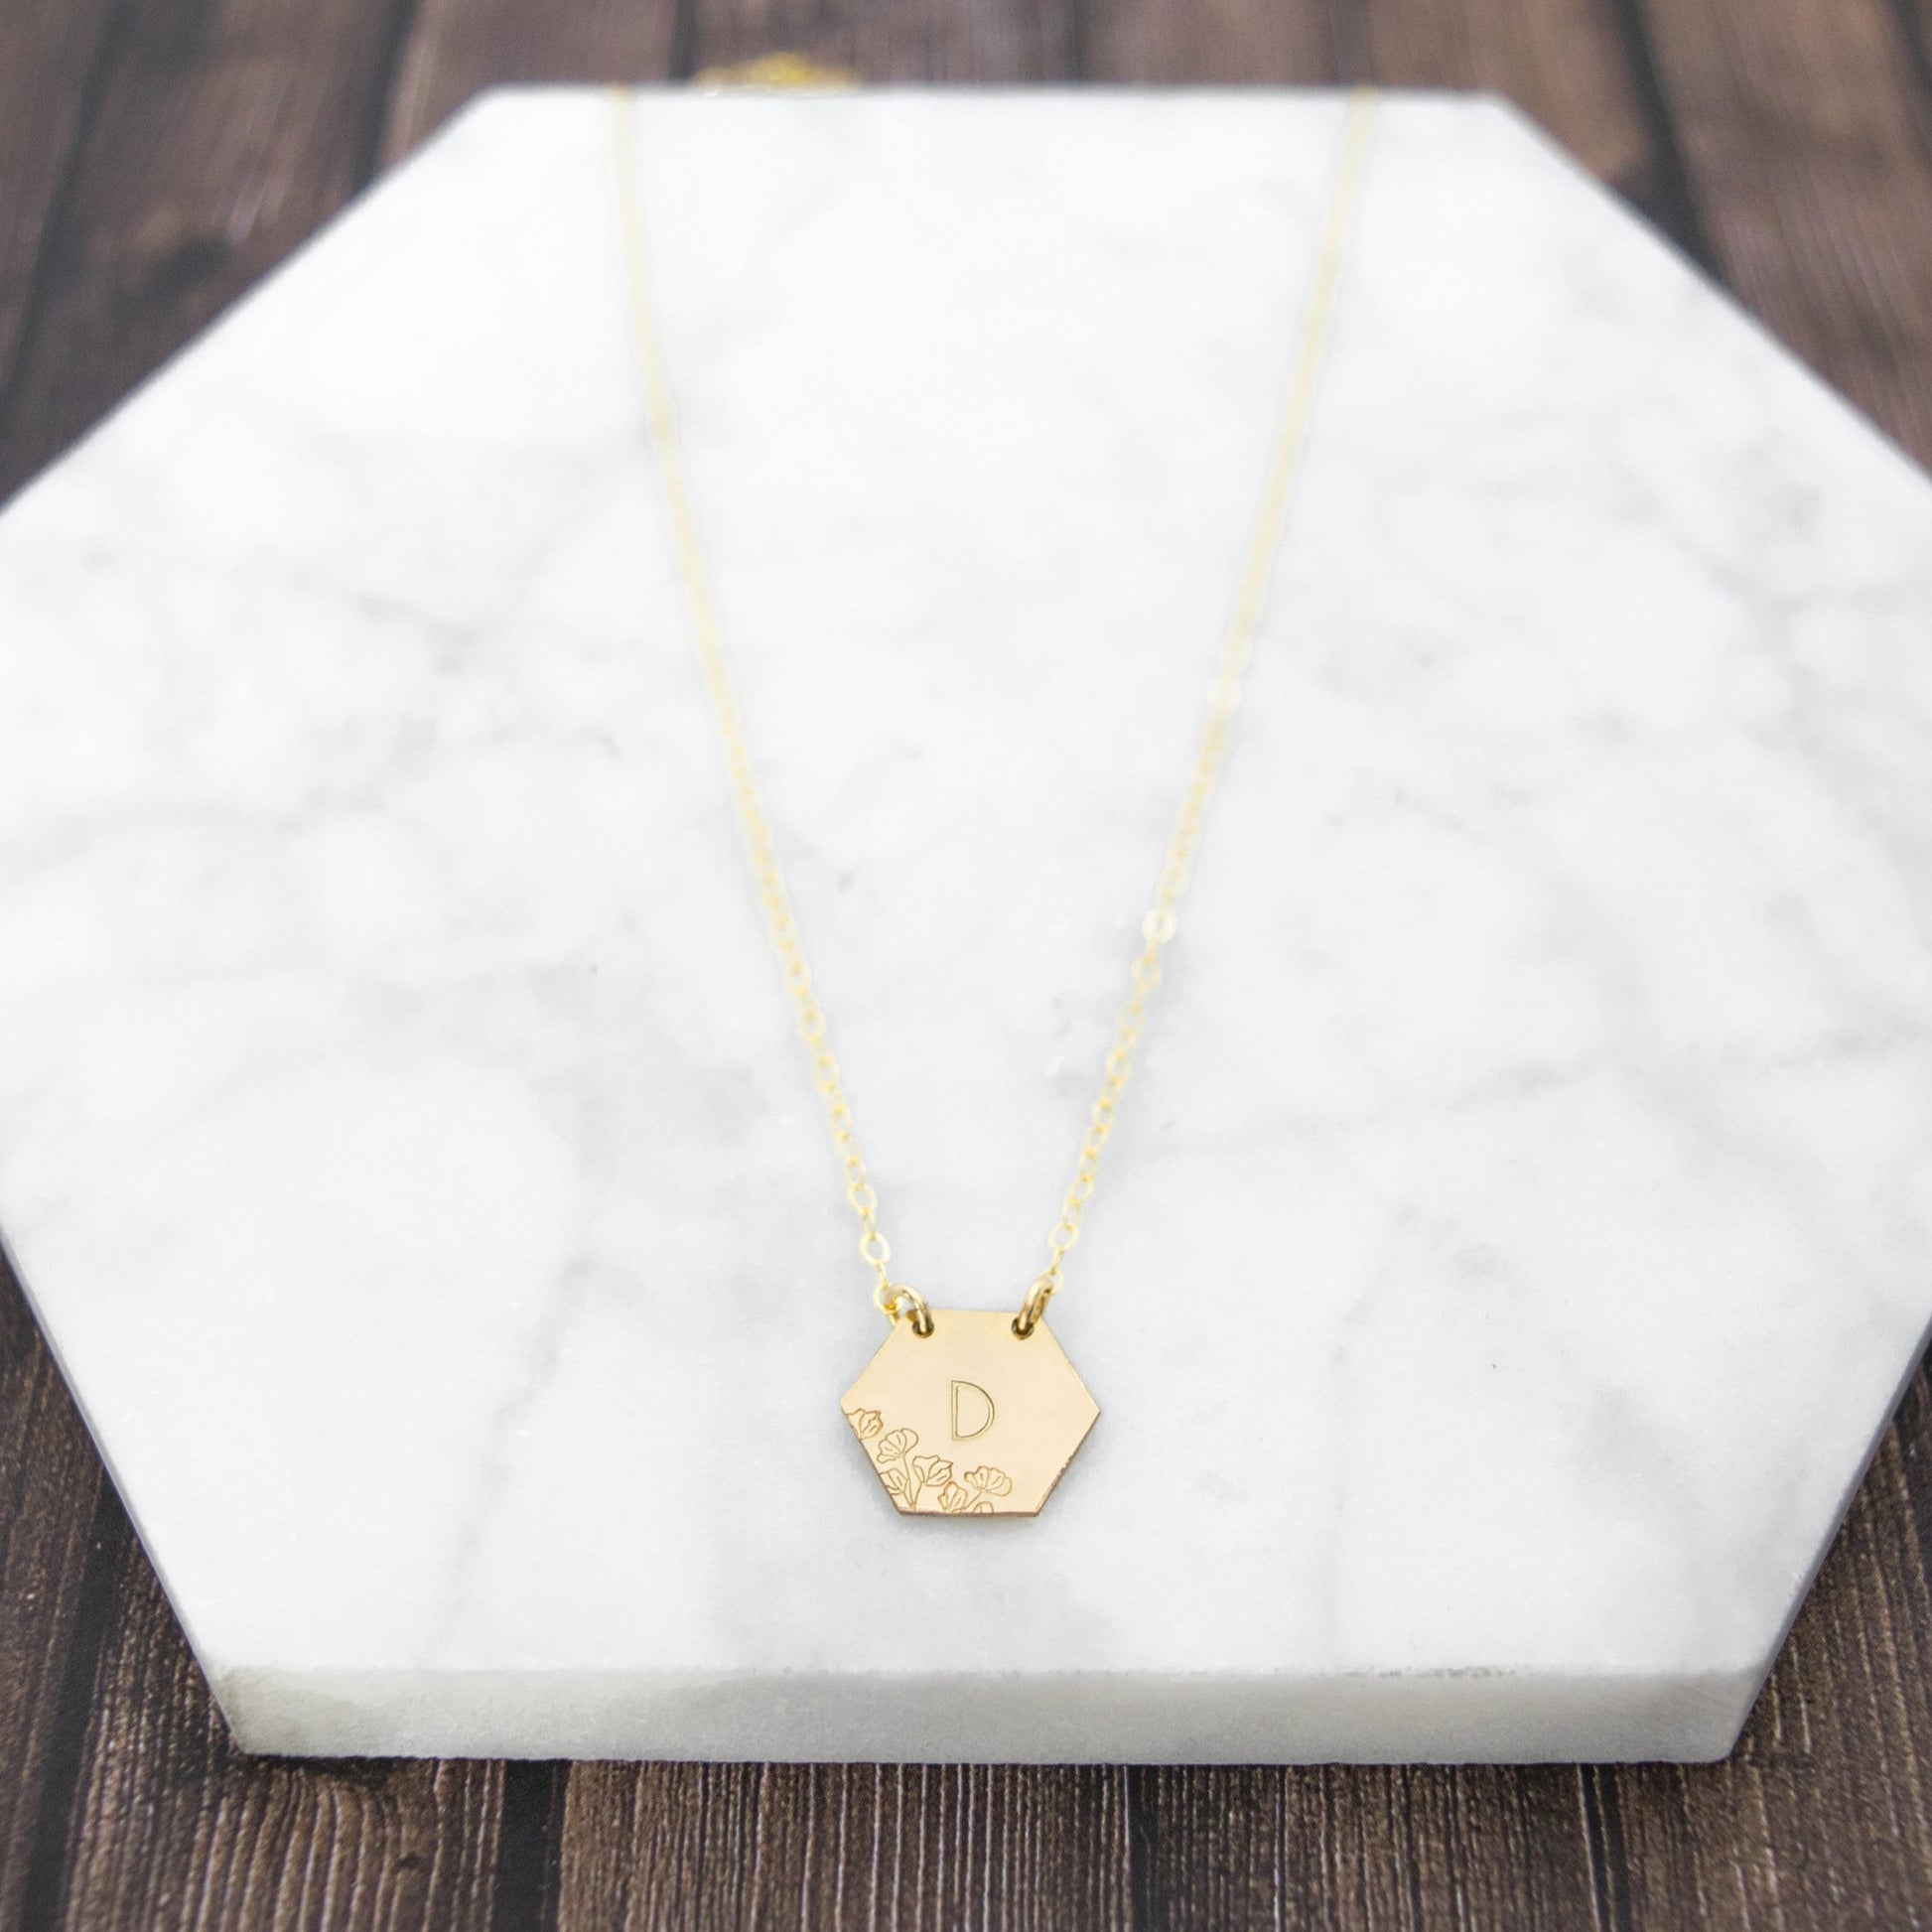 Nature-Inspired Joy Hexagon Initial Necklace - Personalized and Elegant Handcrafted Jewelry